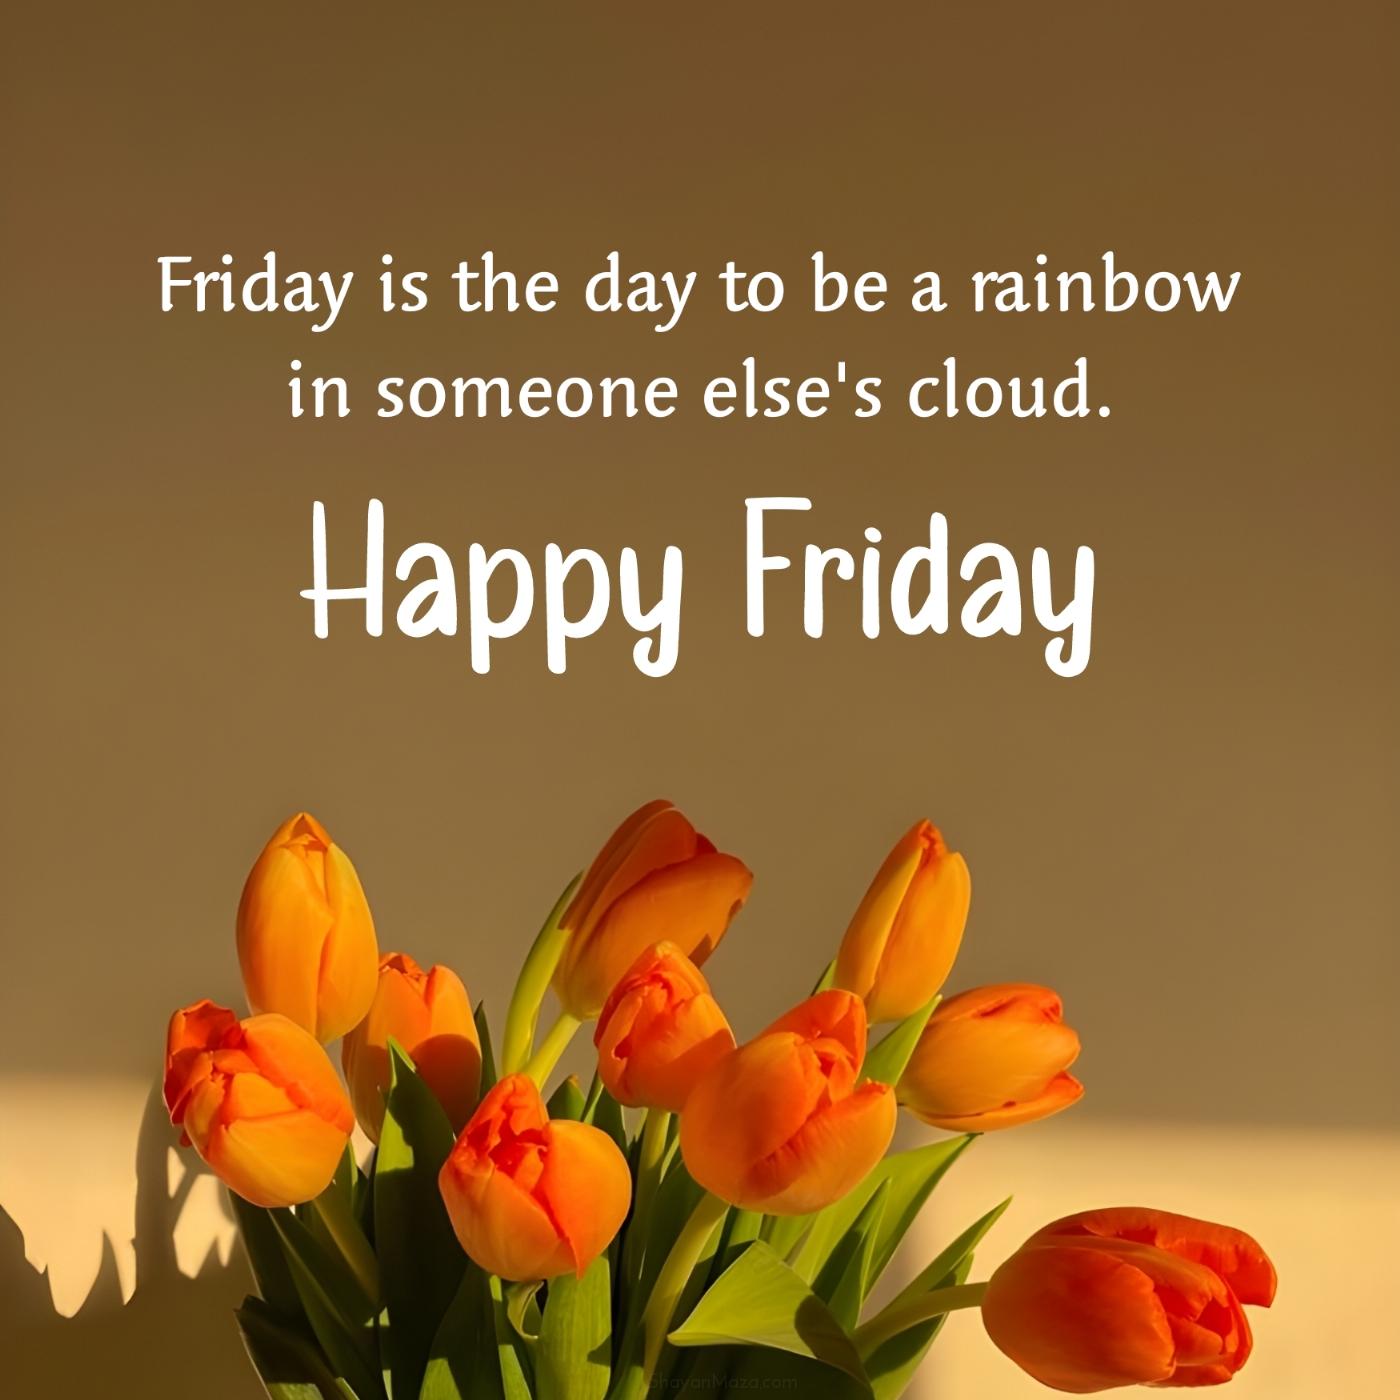 Friday is the day to be a rainbow in someone else's cloud